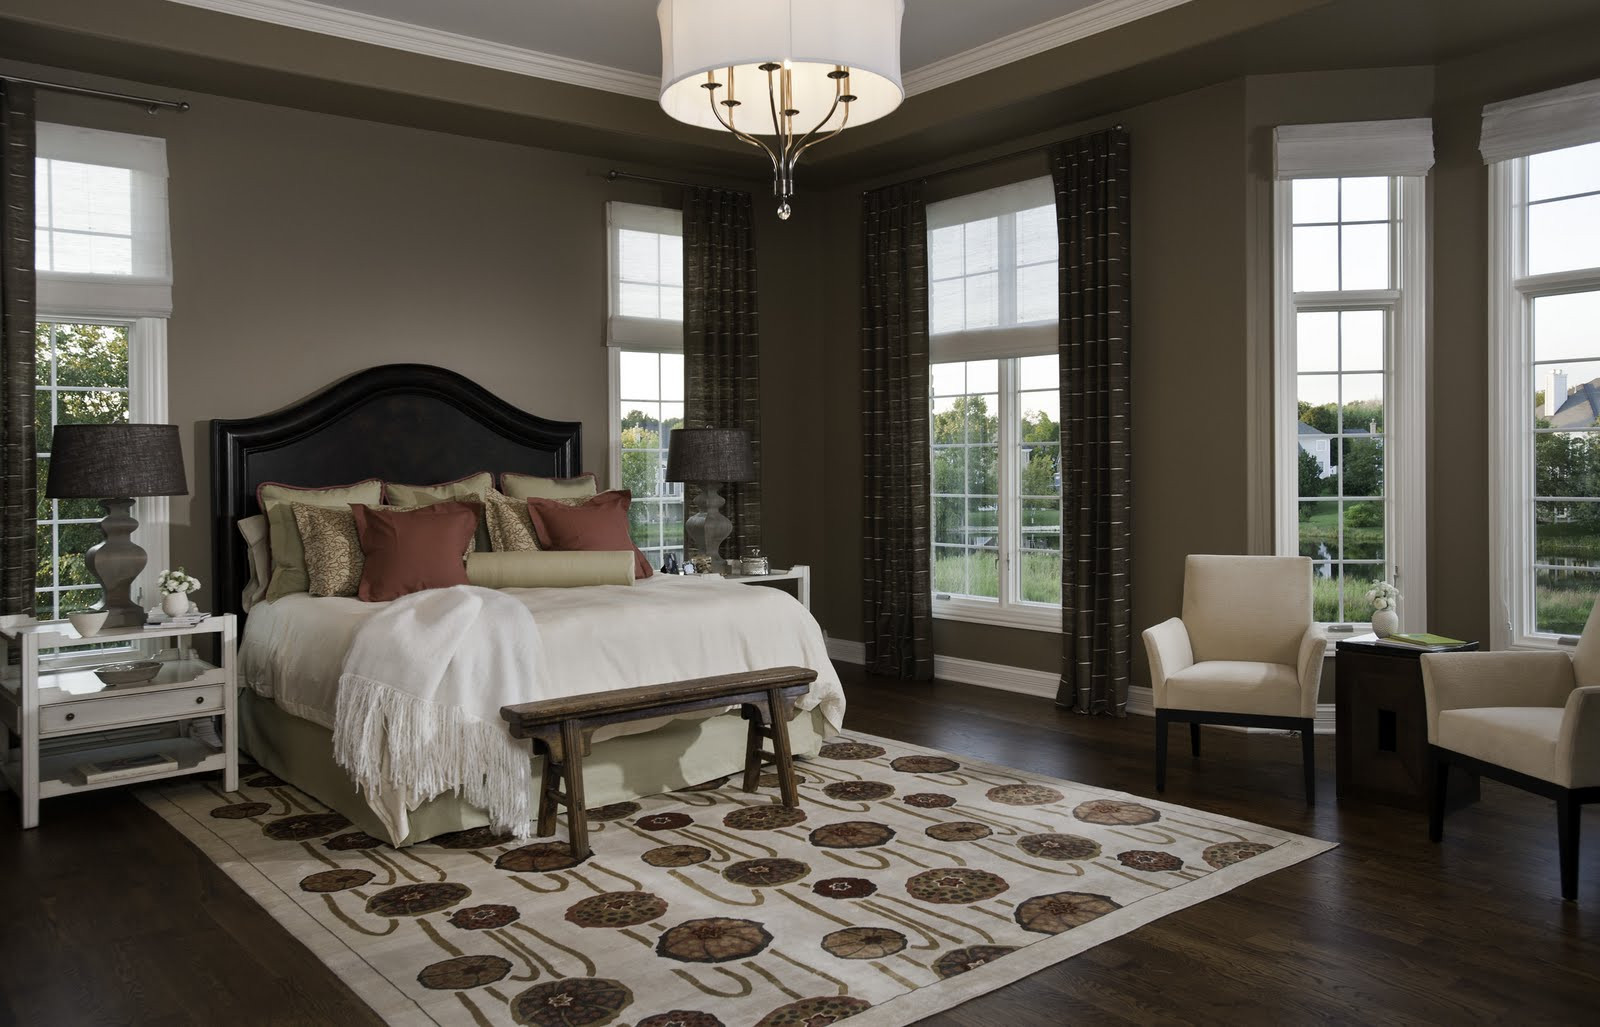 Master Bedroom Windows
 Best Window Treatment Ideas and Designs for 2014 Qnud